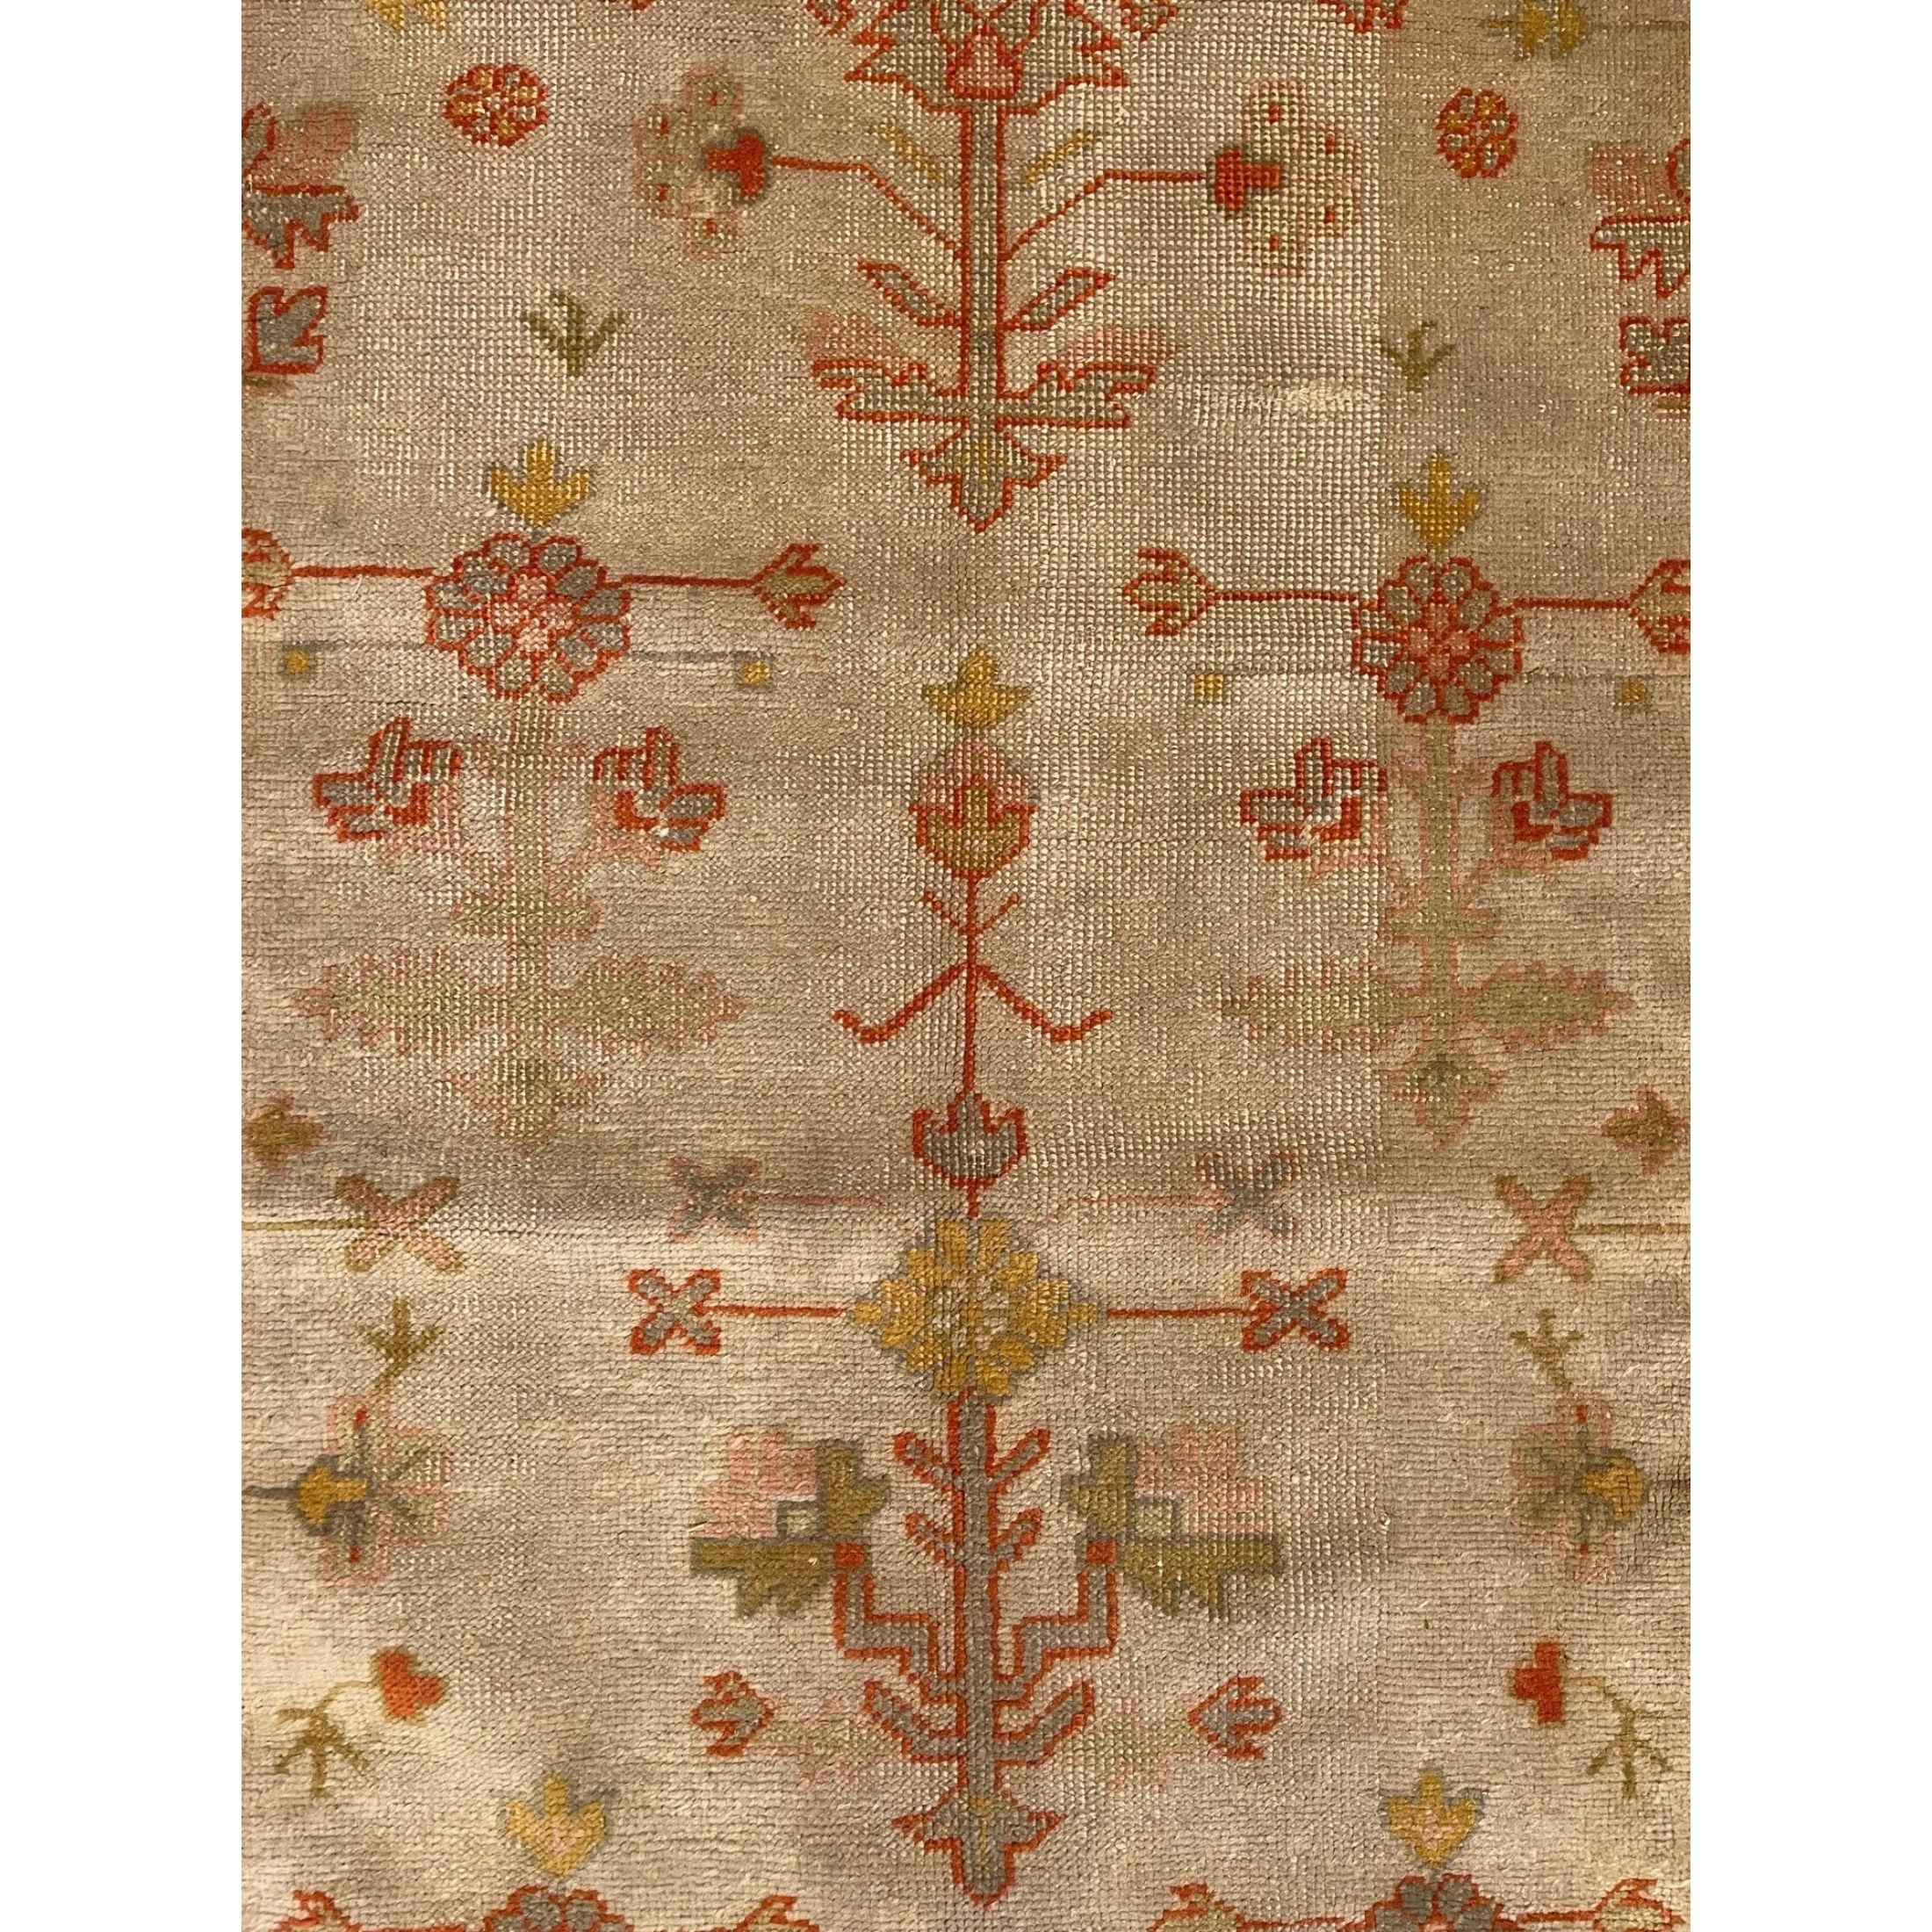 ntique Turkish Oushak rugs have been woven in Western Turkey since the beginning of the Ottoman period. Historians attributed to them many of the great masterpieces of early Turkish carpet weaving from the 15th to the 17th centuries. However, less